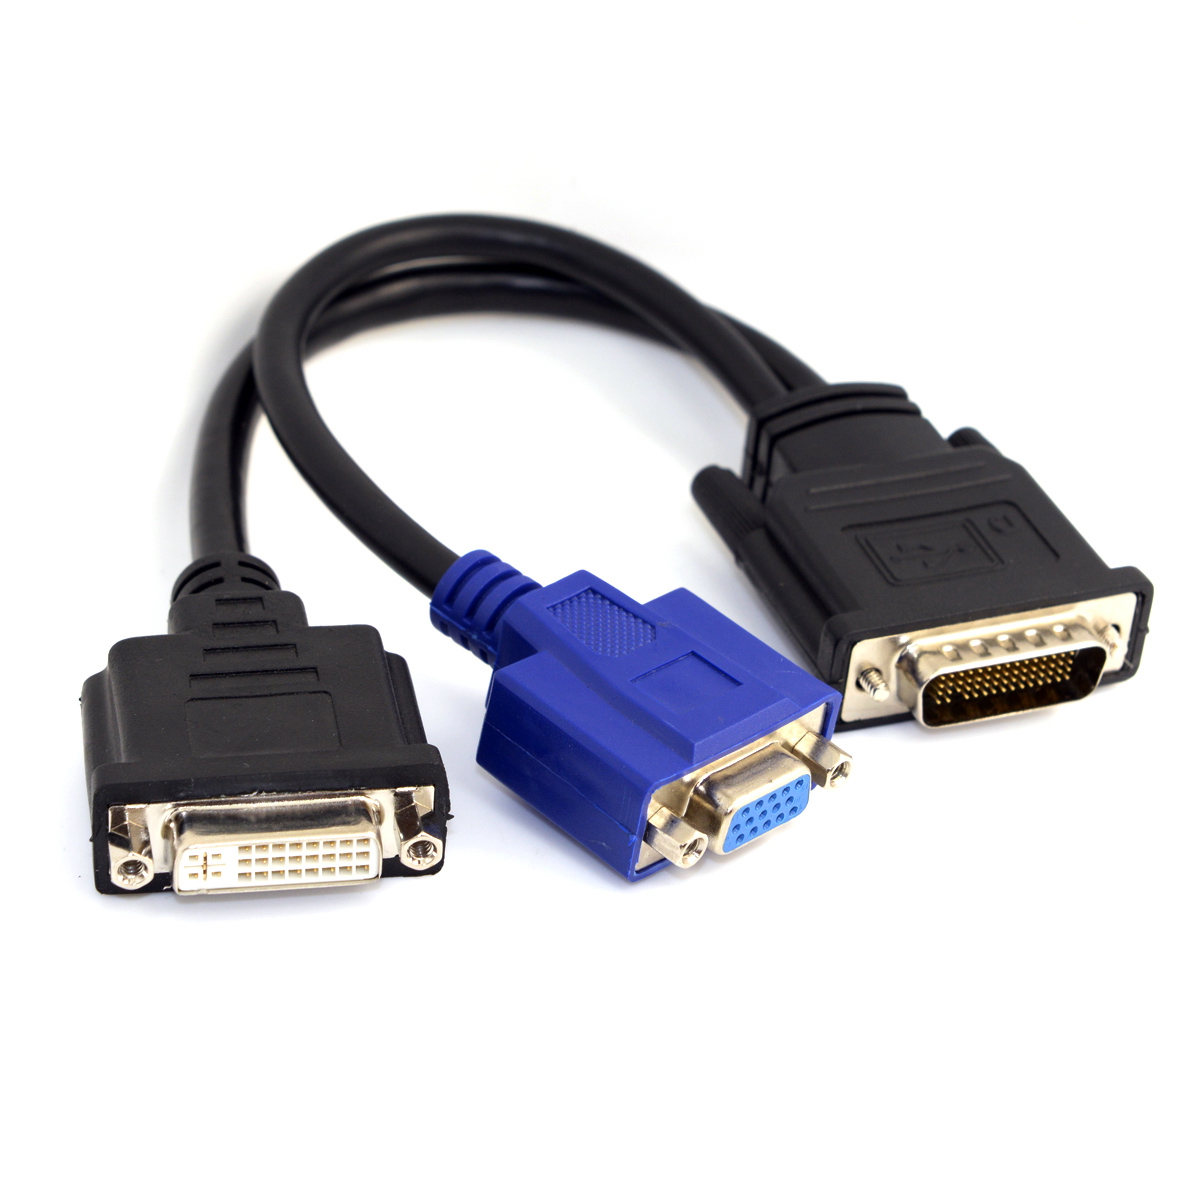 YIWENTEC DMS 59 Pin Male to DVI VGA Female Dual Monitor Extension Cable Adapter for LHF Graphics Card (dms 59 pin Dual vga+dvi) D0504